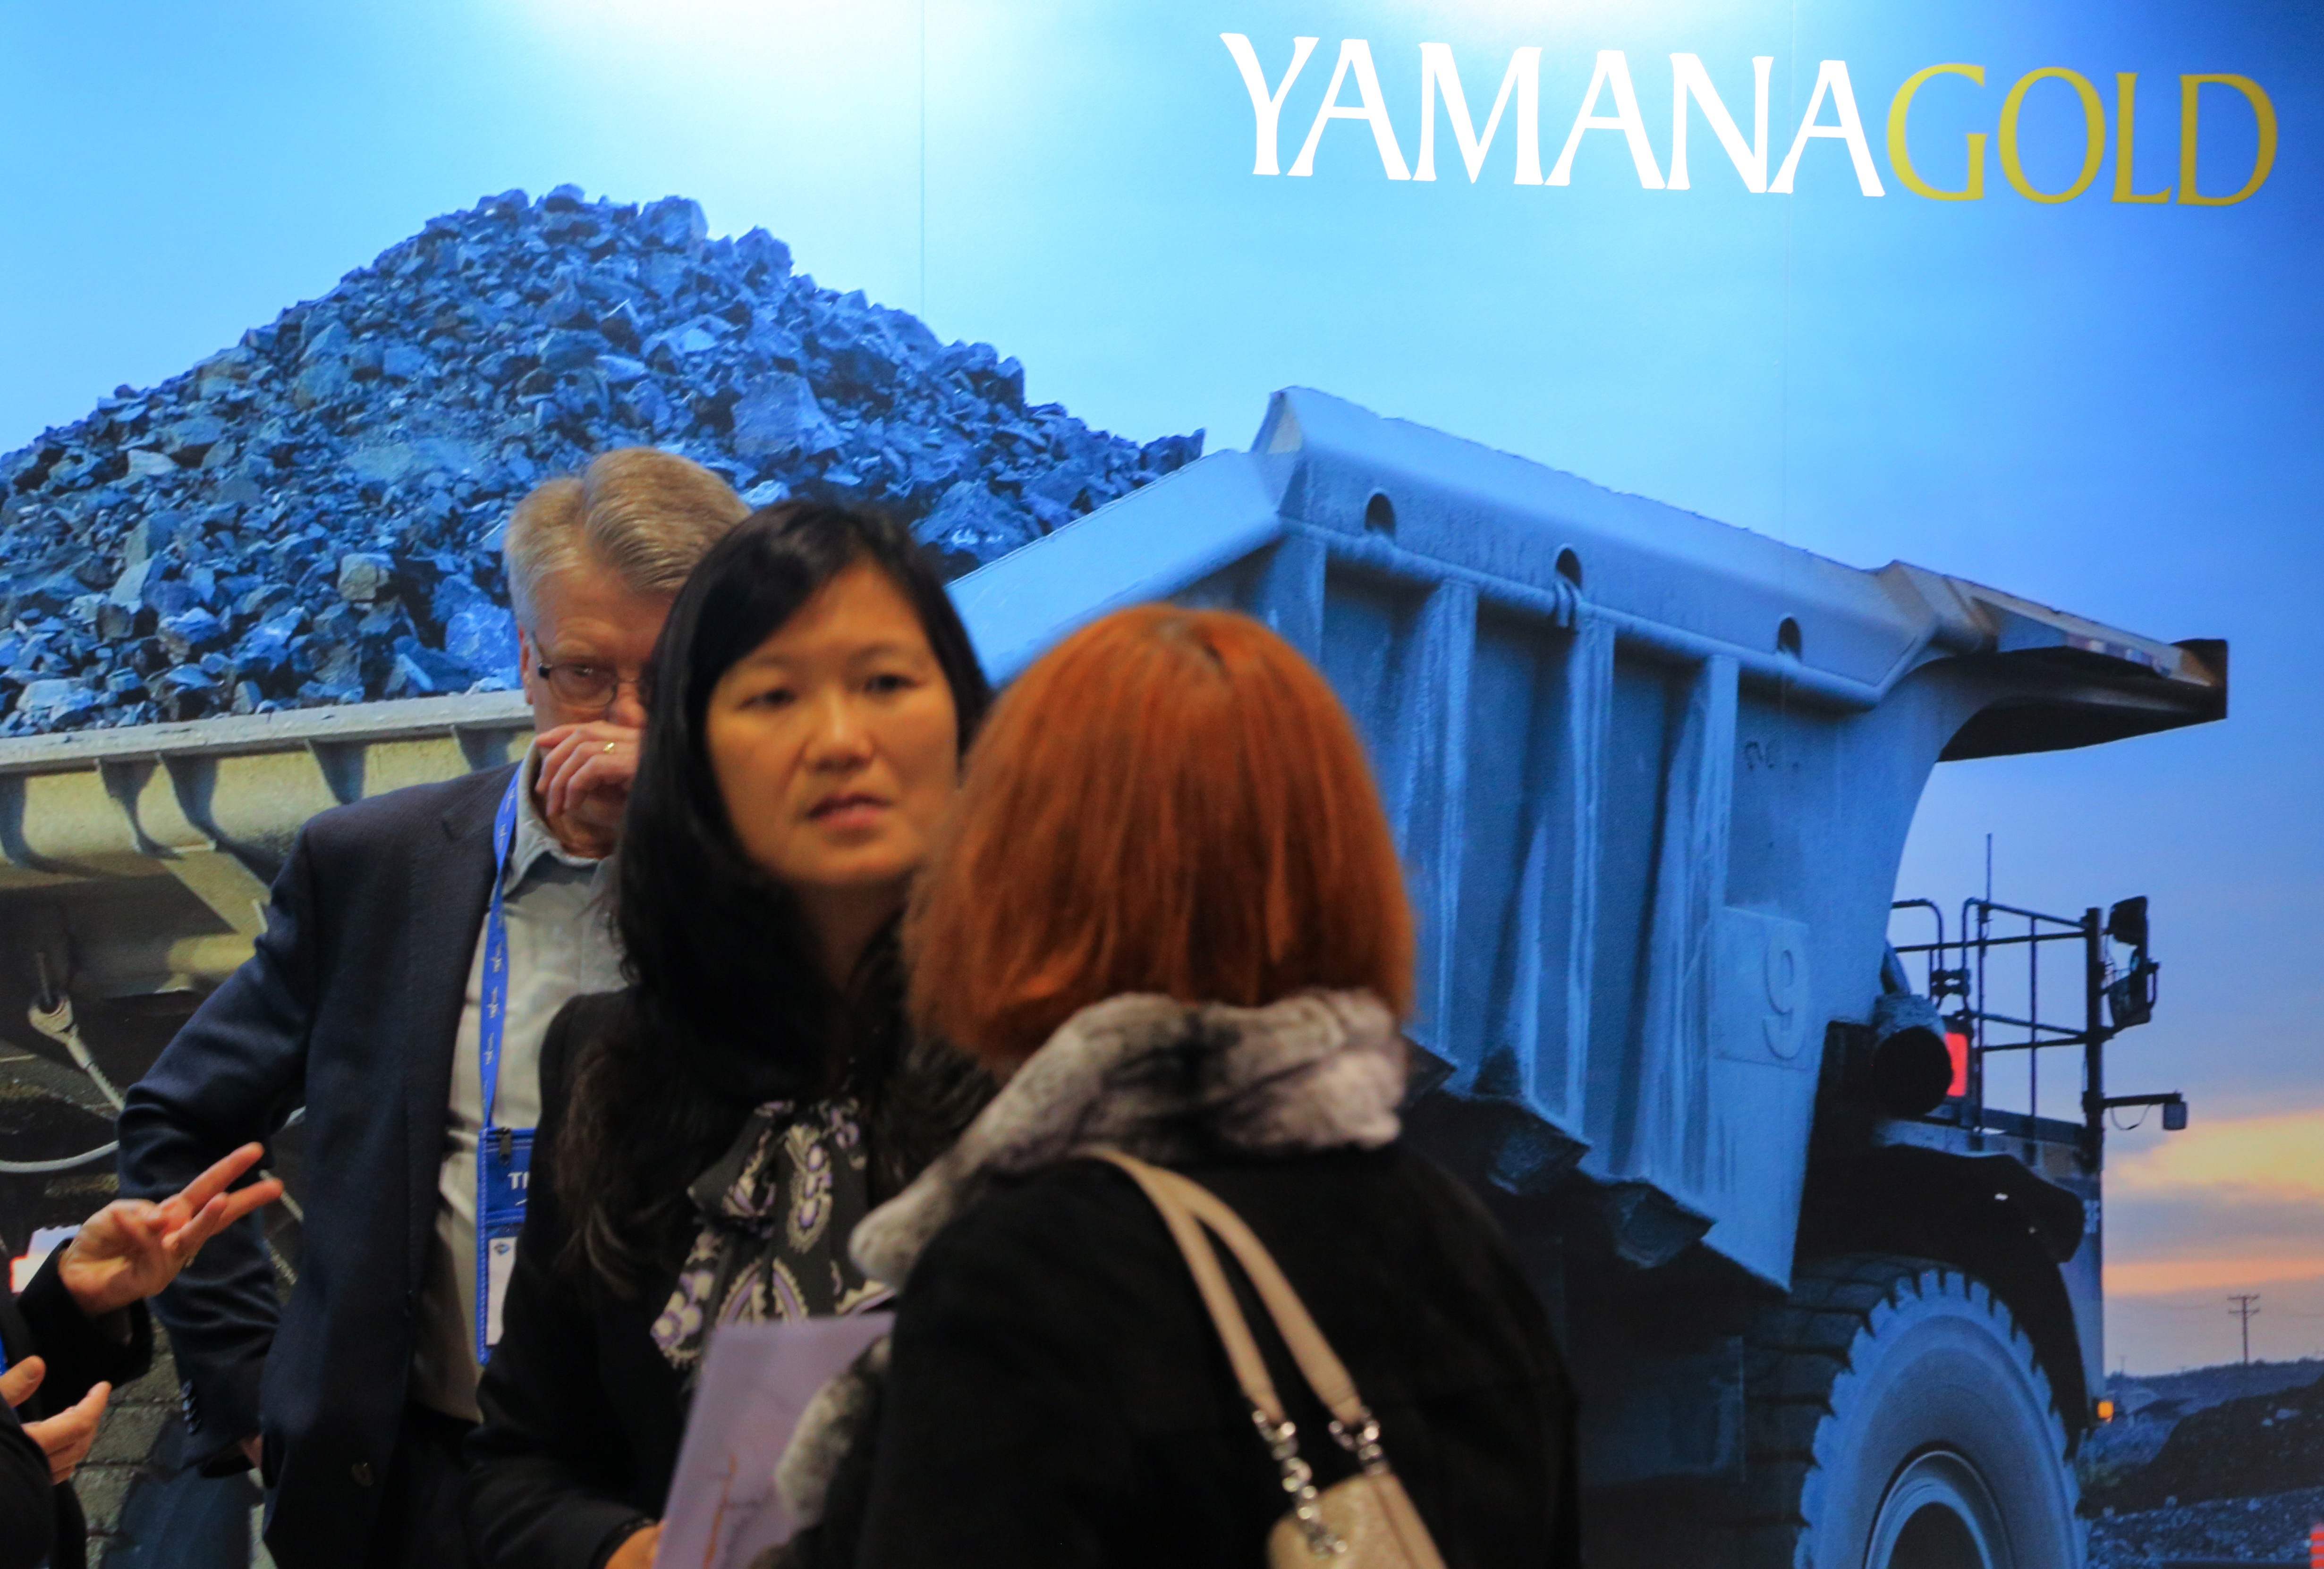 Visitors to the Yamana Gold mining company booth speak with representatives during the PDAC convention in Toronto